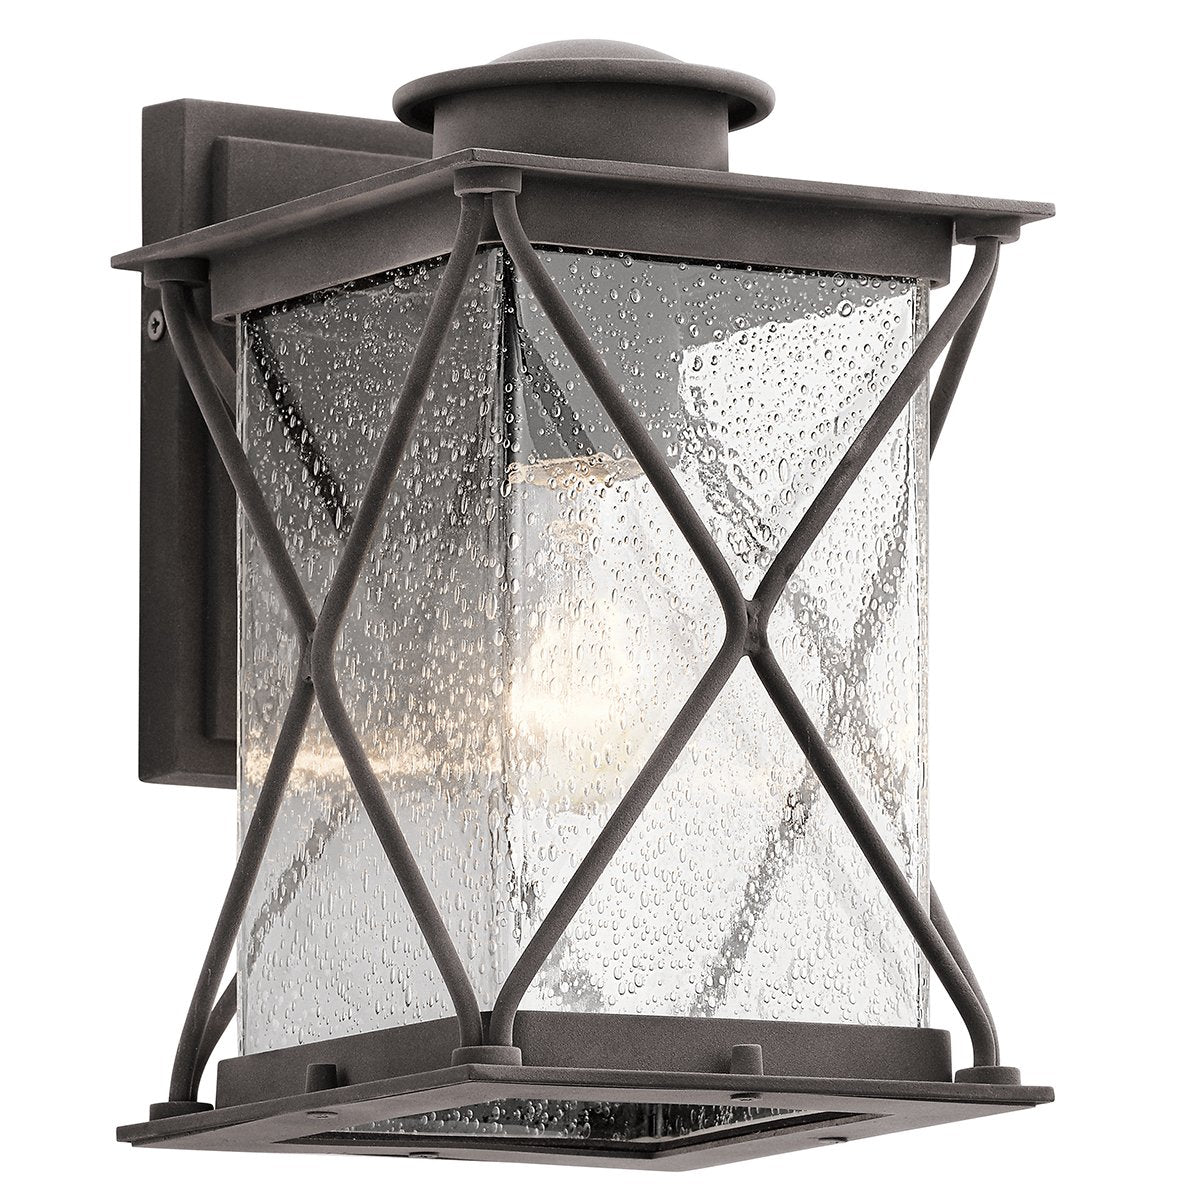 Rosemarkie Textured Weathered Zink Small Outdoor Wall Light - 9857